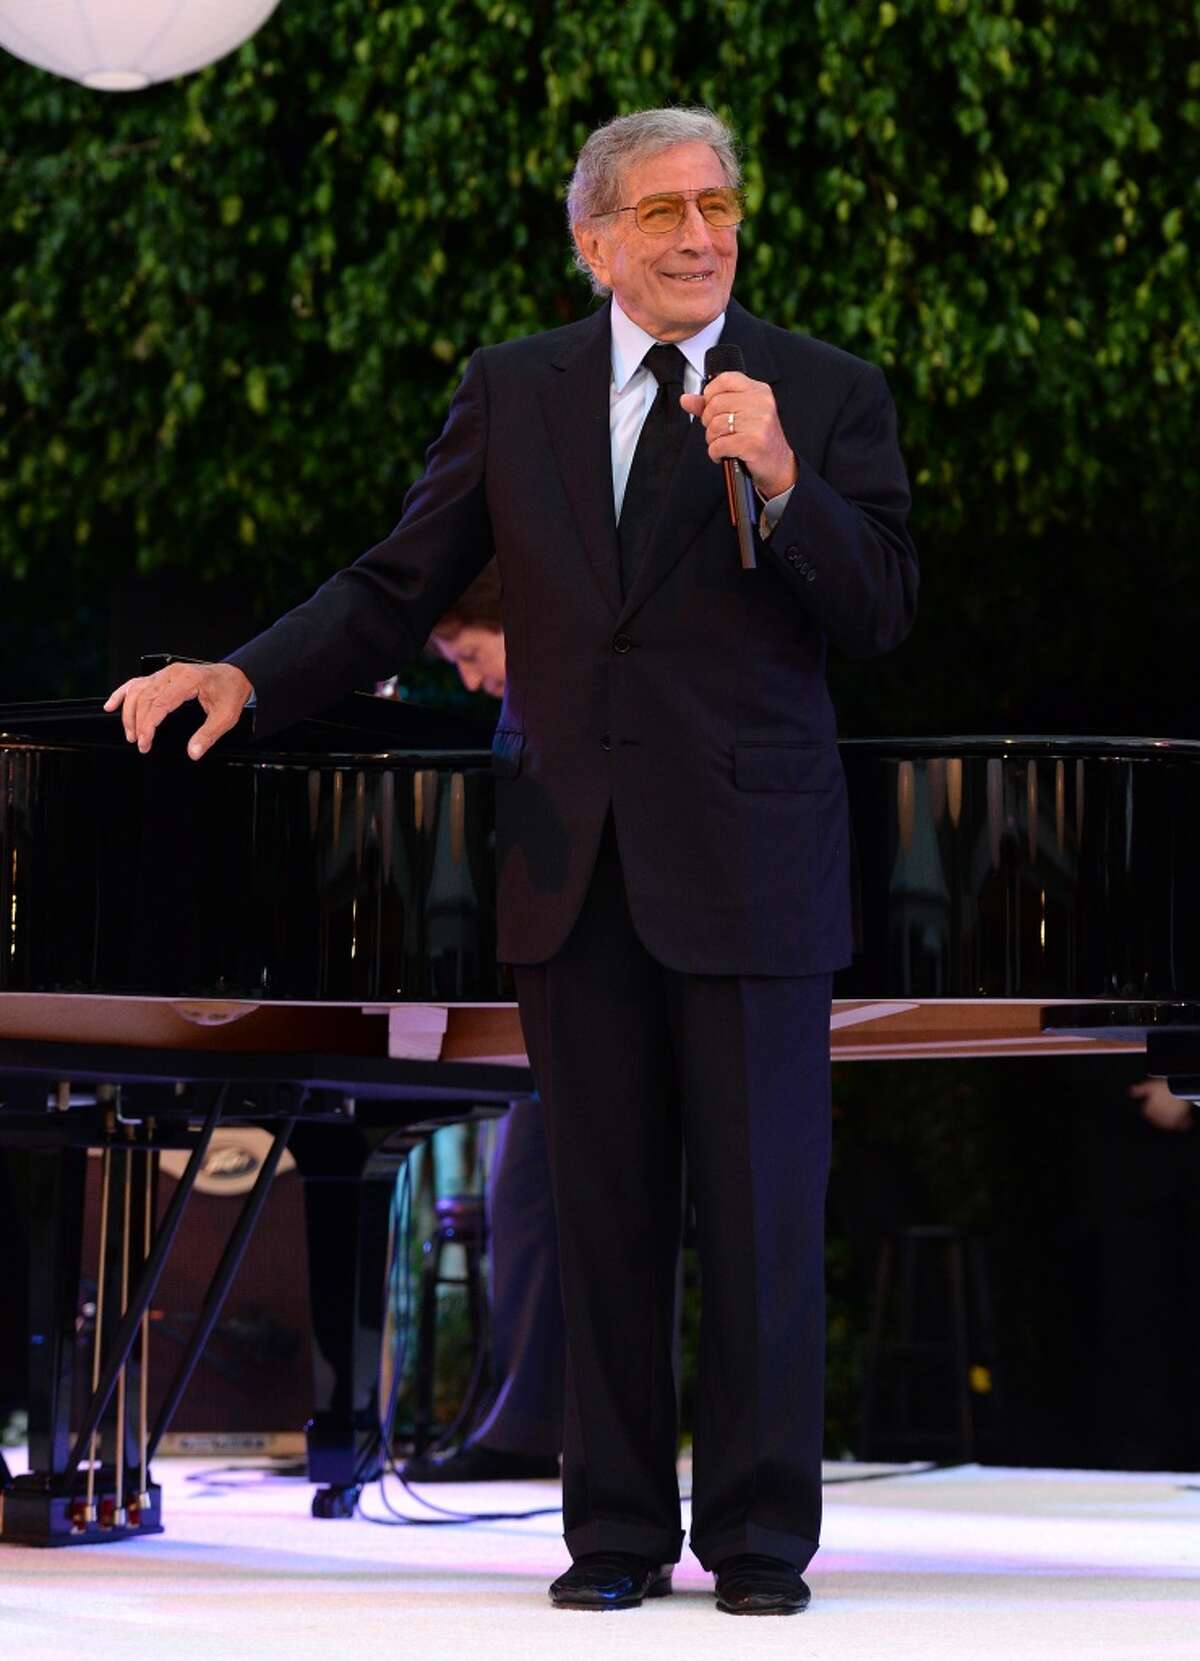 Singer Tony Bennett performs during the 87th birthday celebration of Tony Bennett and fundraiser for Exploring the Arts, the charity organization founded by Mr. Bennett and wife Susan Benedetto, hosted by Ted Sarandos & Nicole Avant Sarandos among celebrity friends and family on August 3, 2013 in Beverly Hills, California.